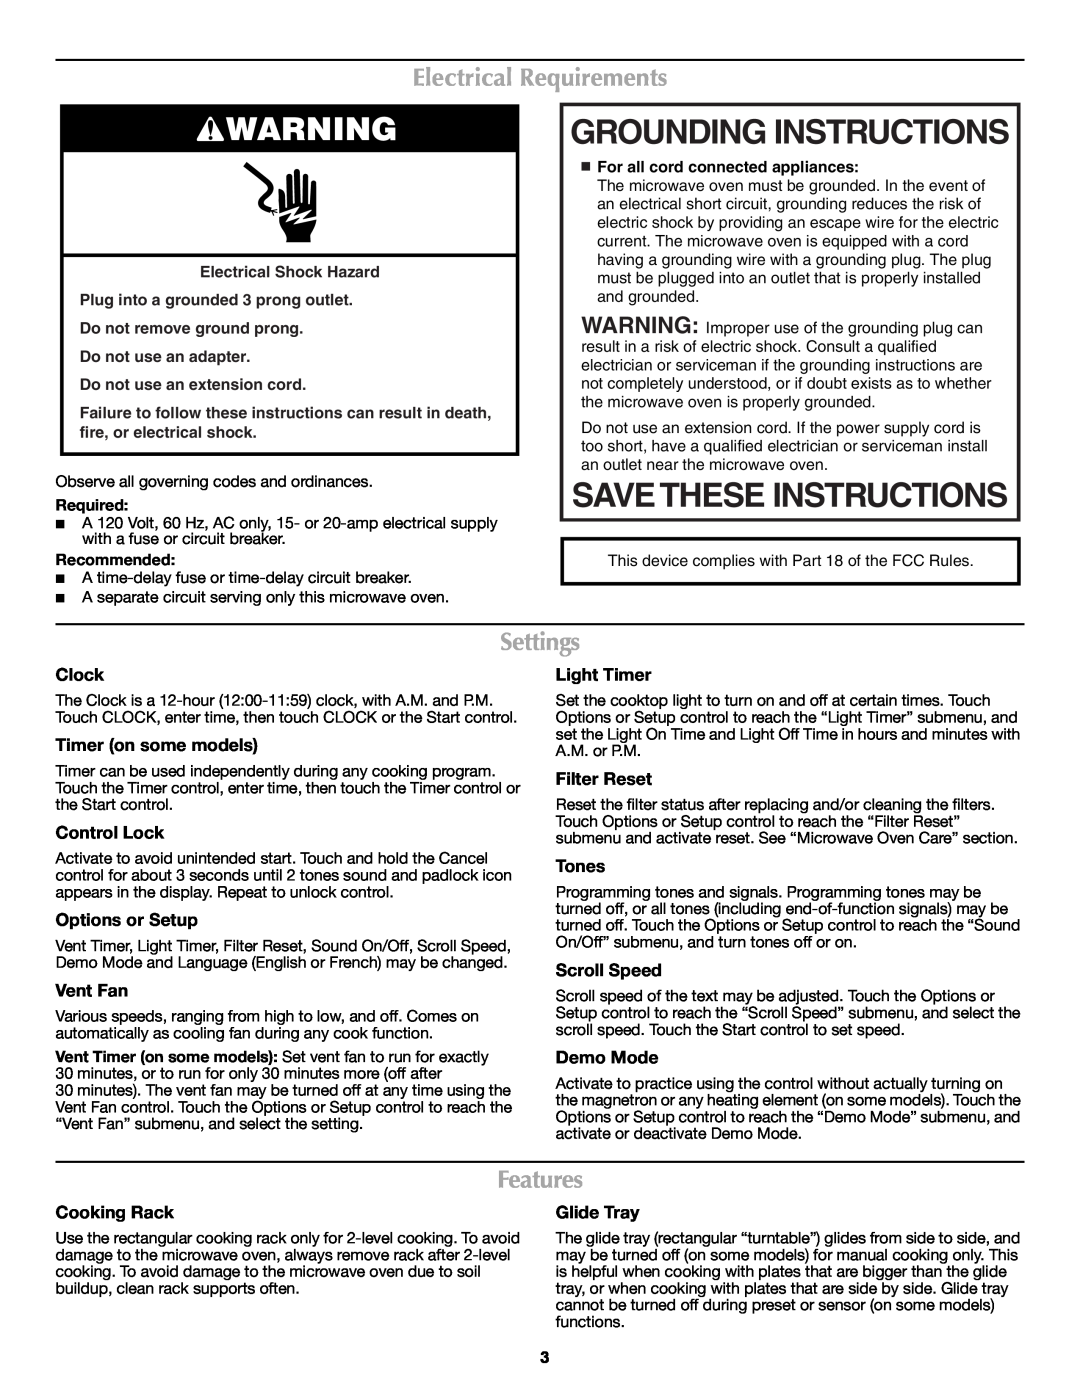 Maytag W10274323A Grounding Instructions, Electrical Requirements, Settings, Features, Clock, Timer on some models, Tones 